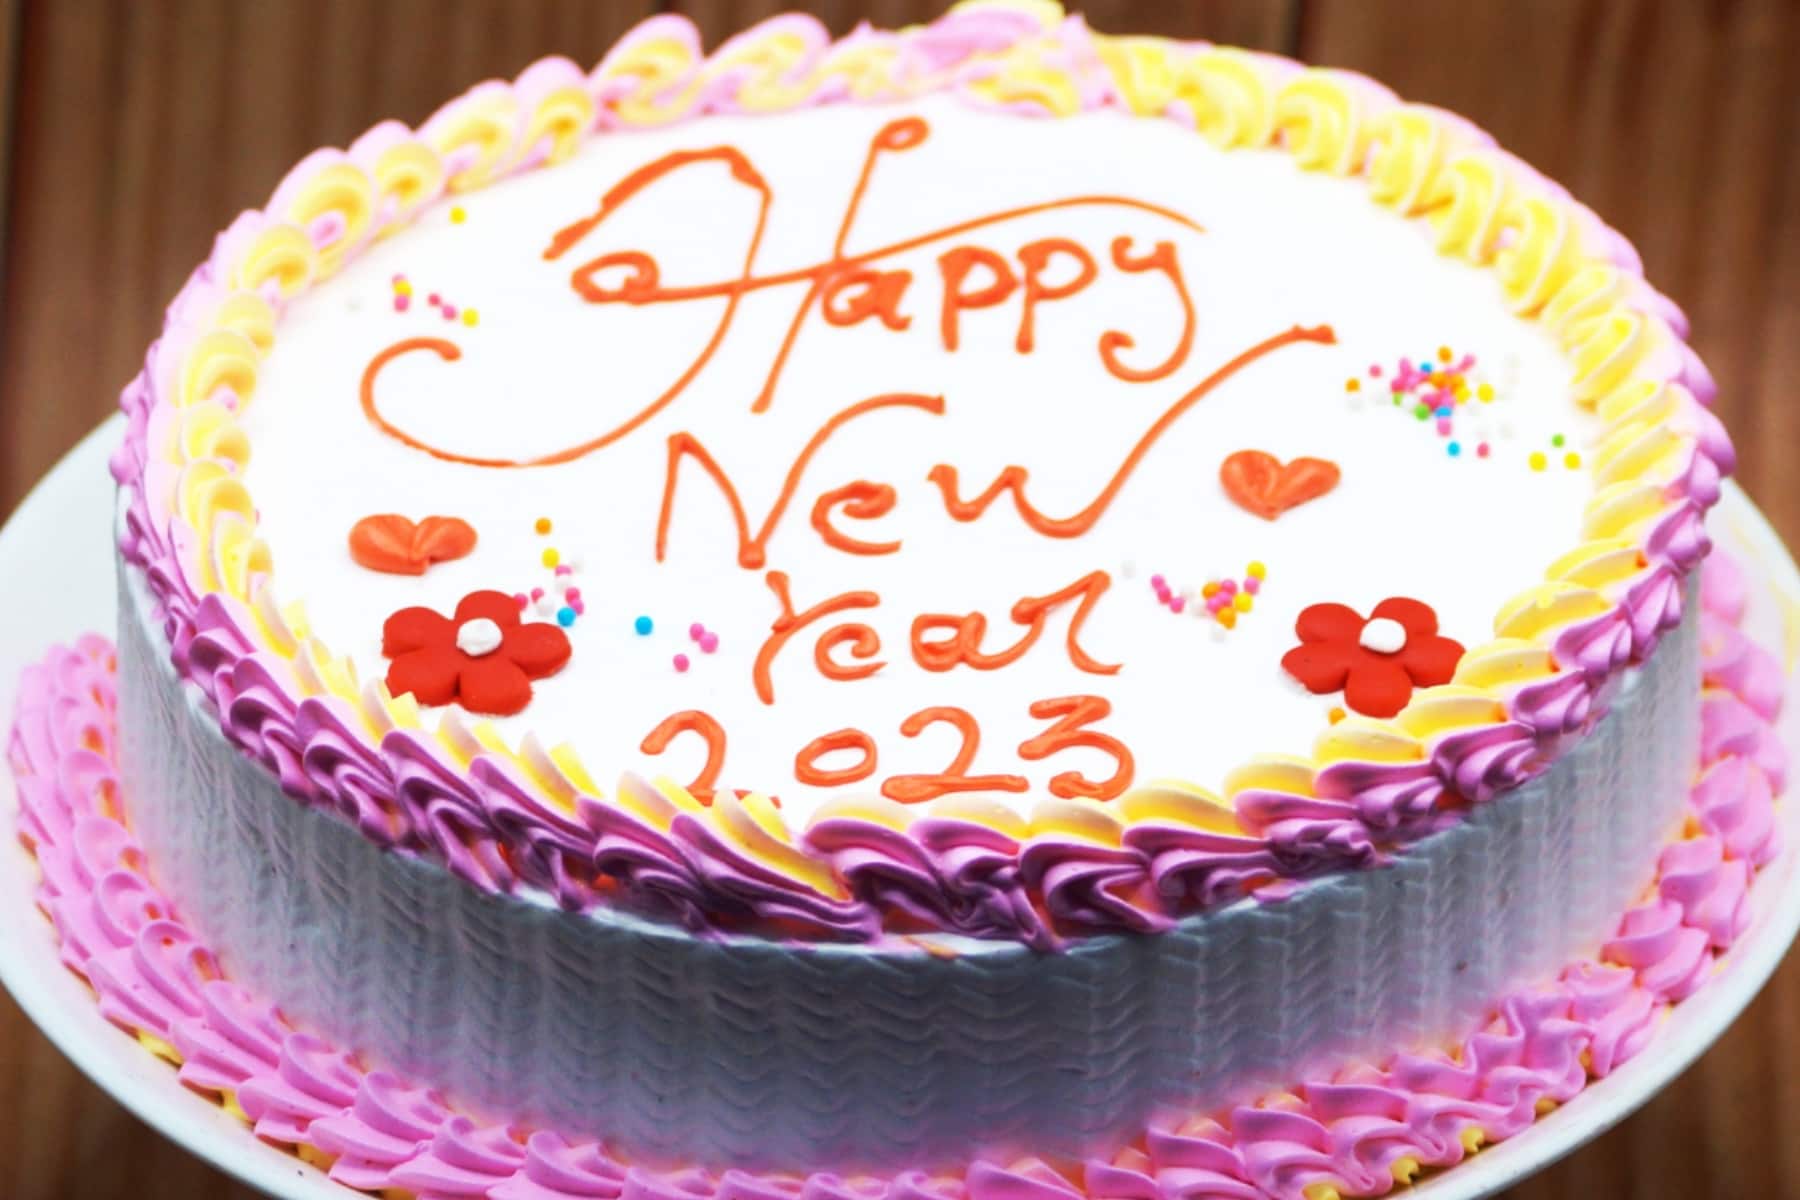 3D Chocolate Happy New Year Cake 1 Kg, Cakes on New Year